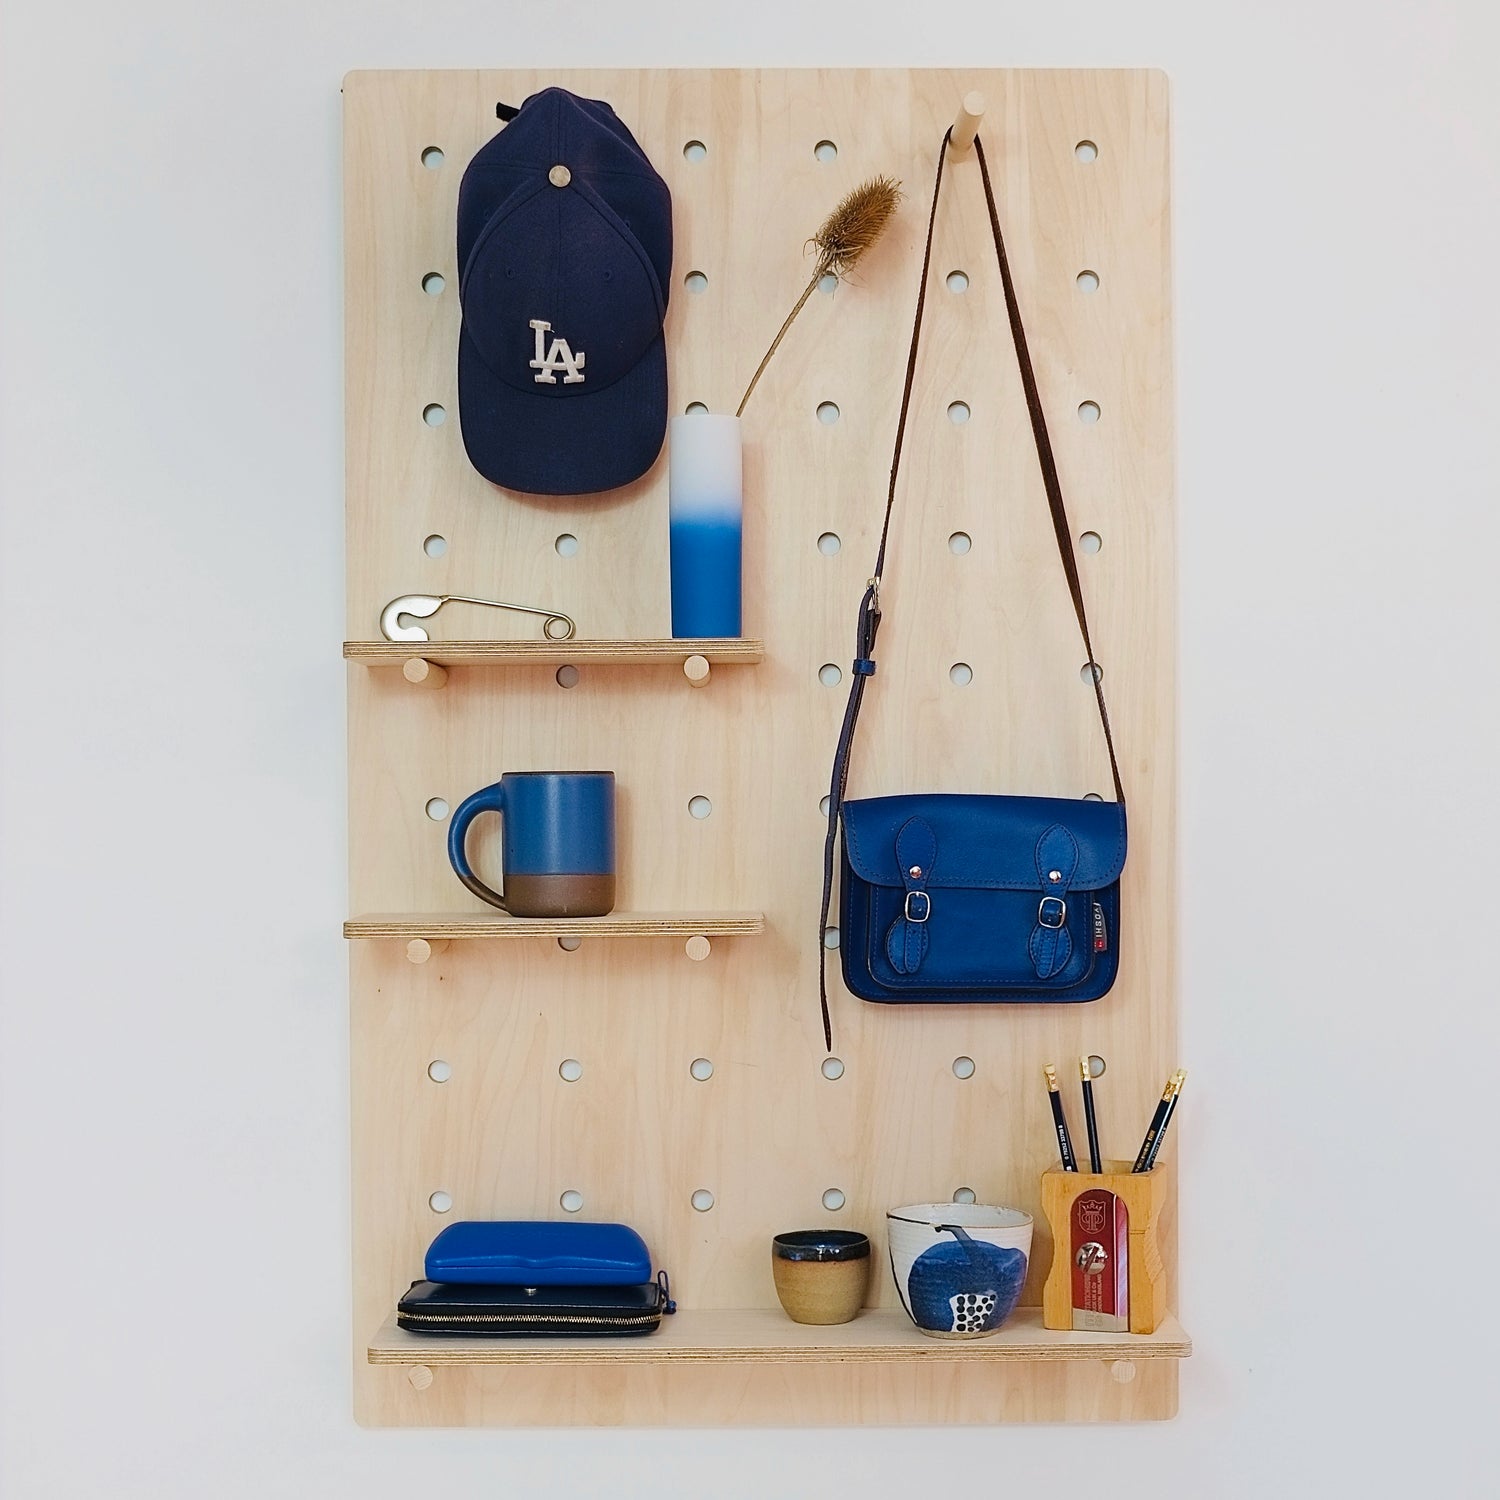 A large pale wooden pegboard with many drilled holes, three shelves & pegs face front on. Various blue accessories are displayed on the board.